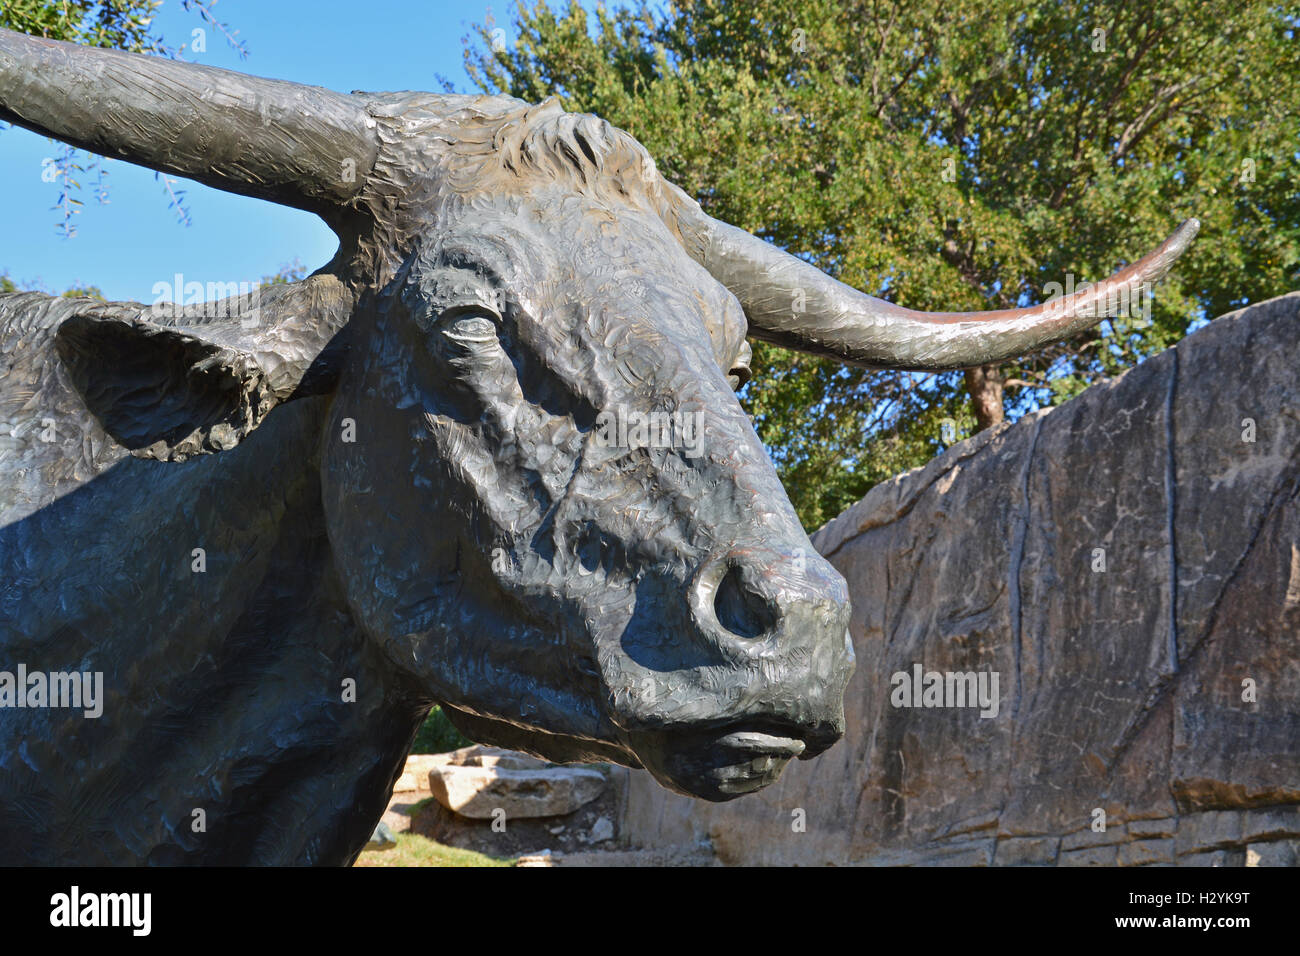 Close up of a bull one of around 50 bronze statues of an old west cattle drive in Pioneer Plaza, downtown Dallas, Texas. Stock Photo